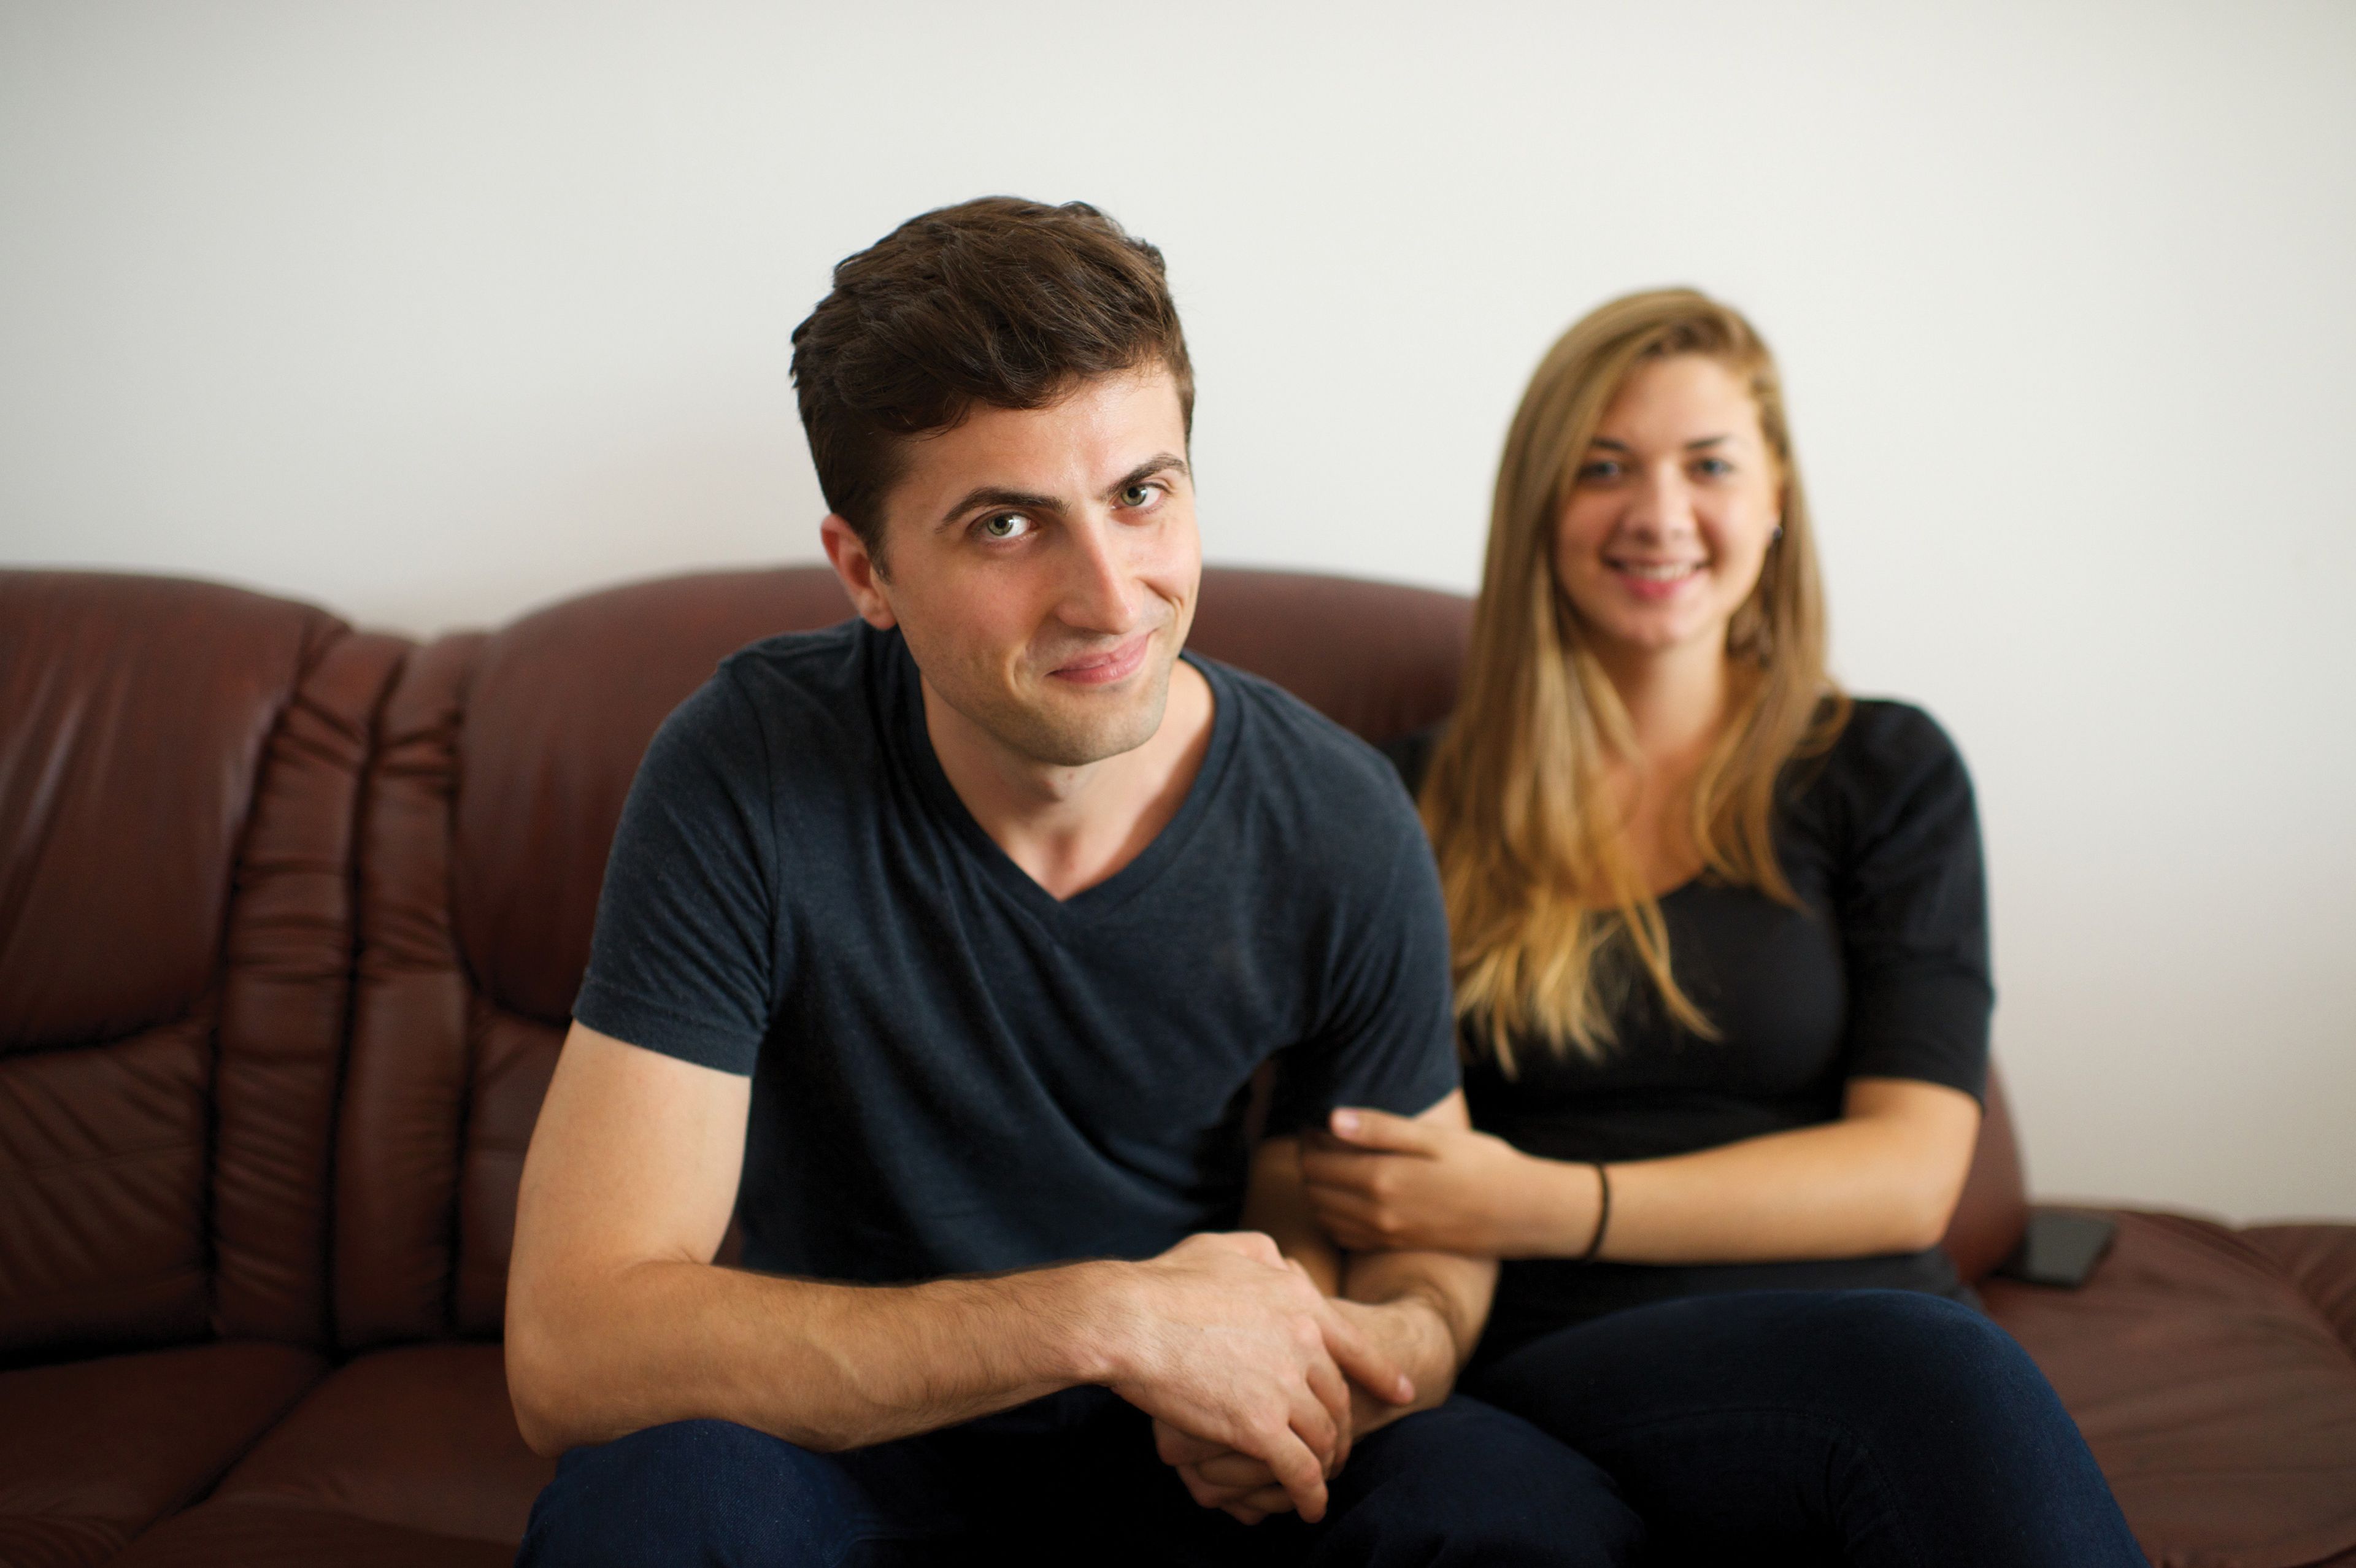 A young couple from Romania sitting on a brown couch beside each other.